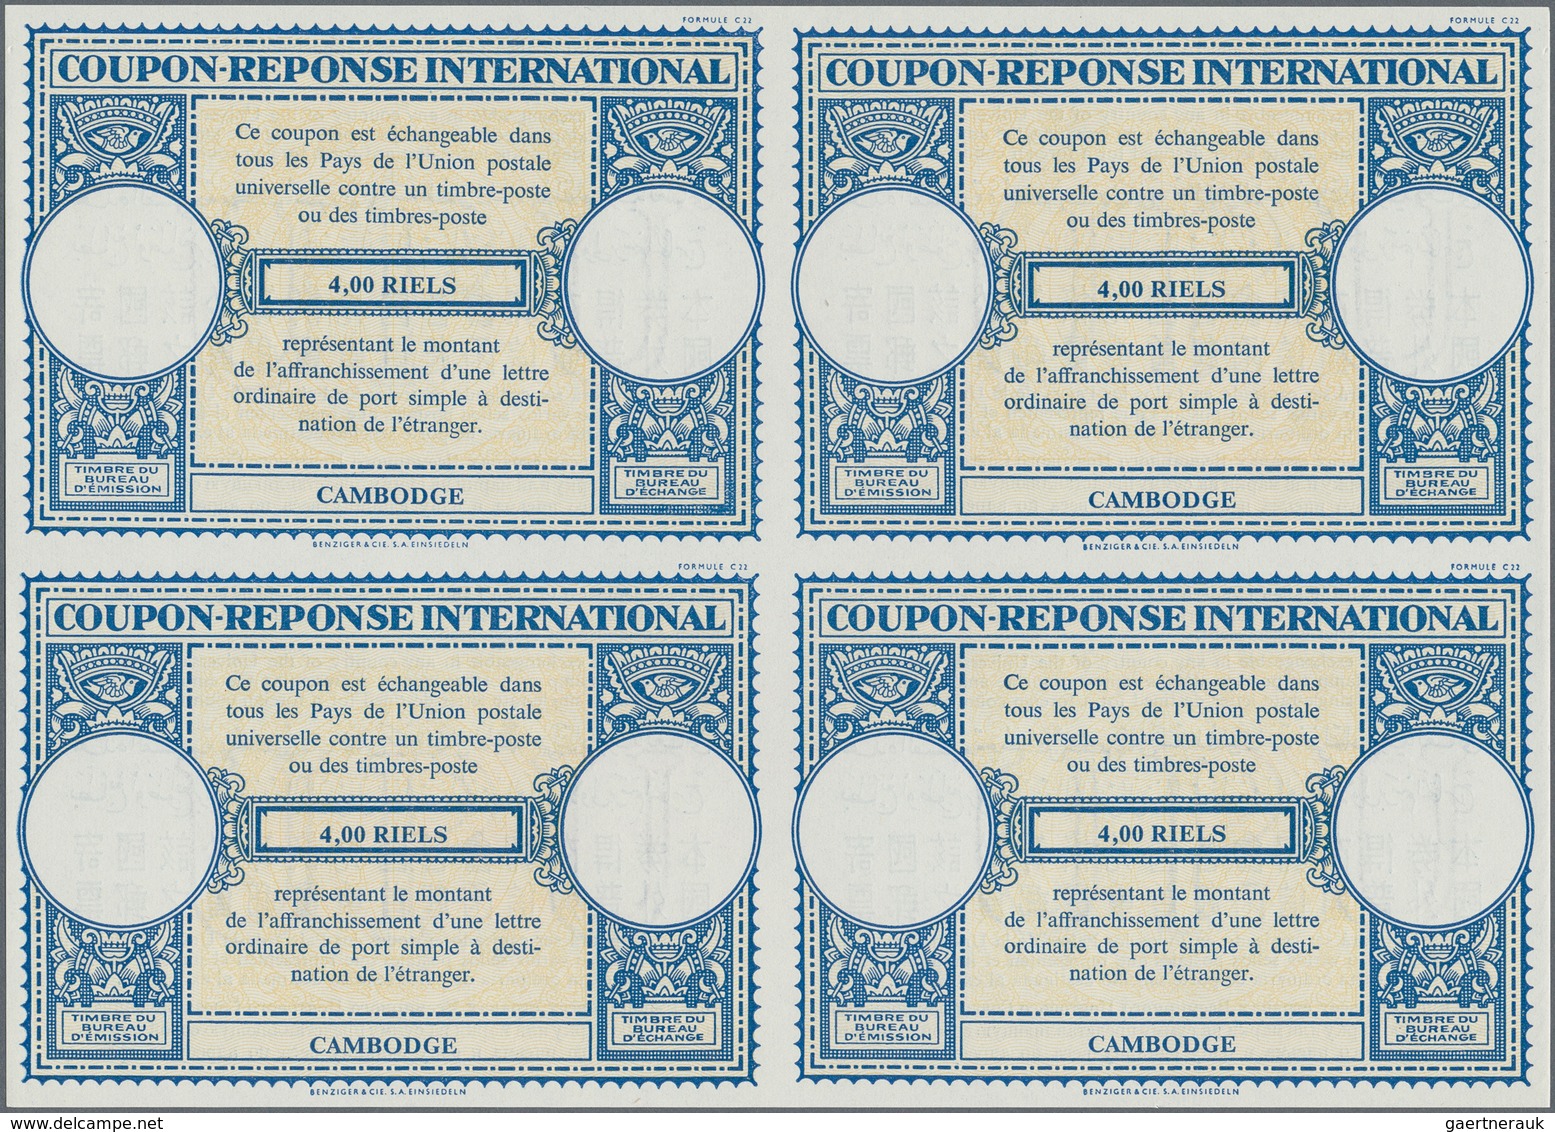 Kambodscha: 1955 (approx). International Reply Coupon 4,00 Riels (London Type) In An Unused Block Of - Cambodge